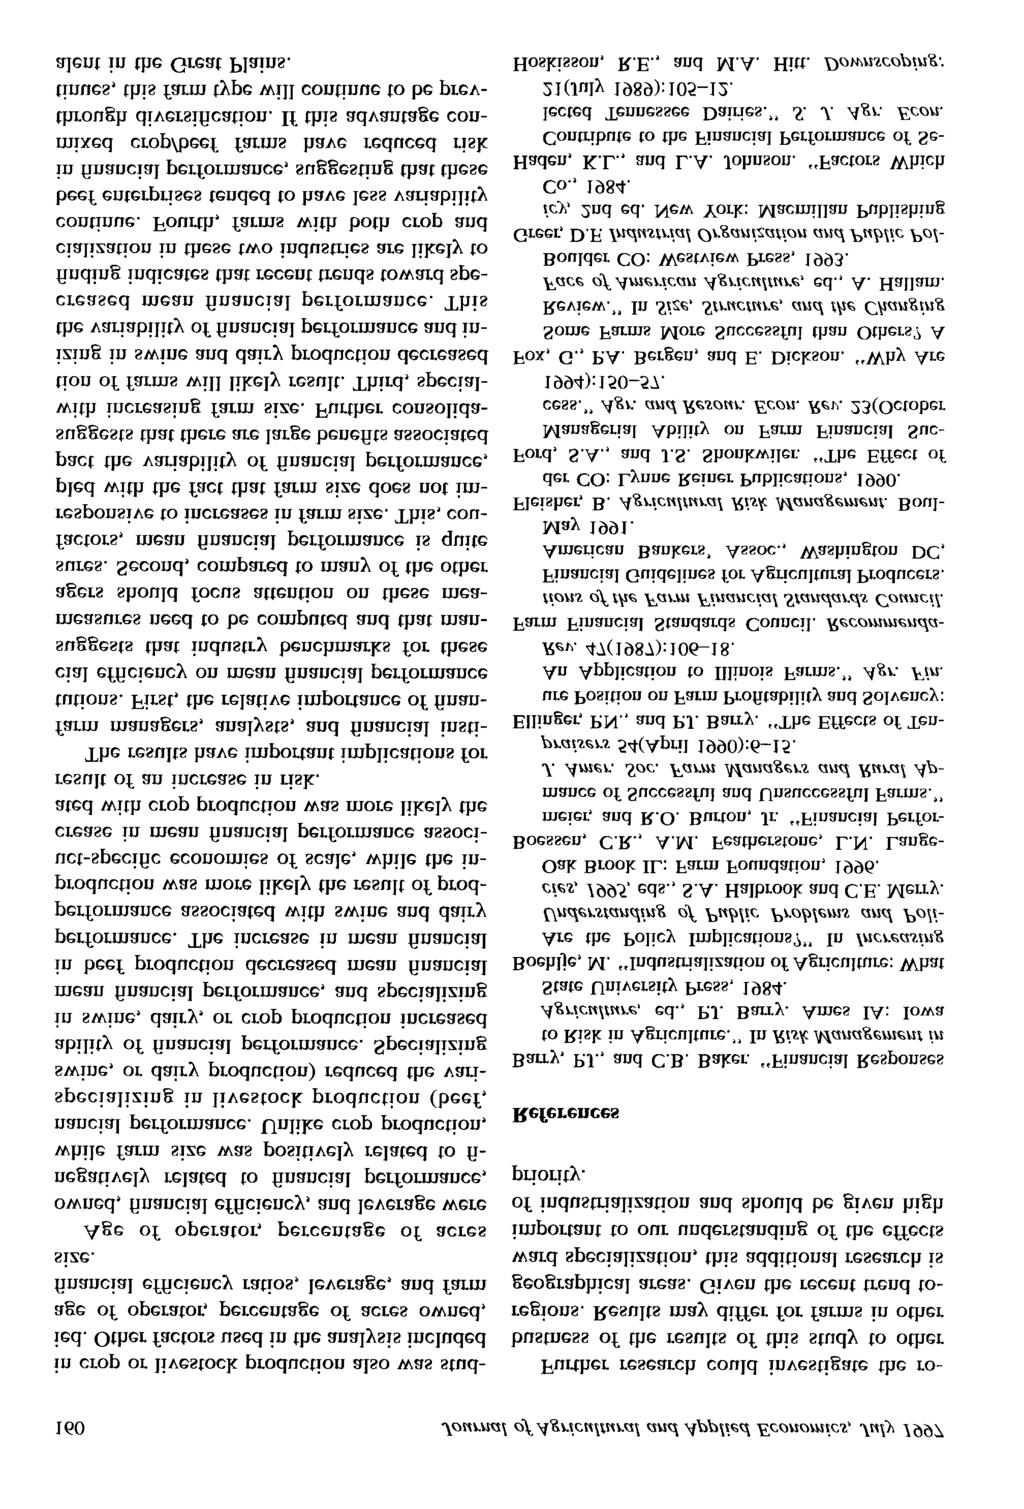 160 Journal of Agricultural and Applied Economics, July 1997 in crop or livestock production also was studied.